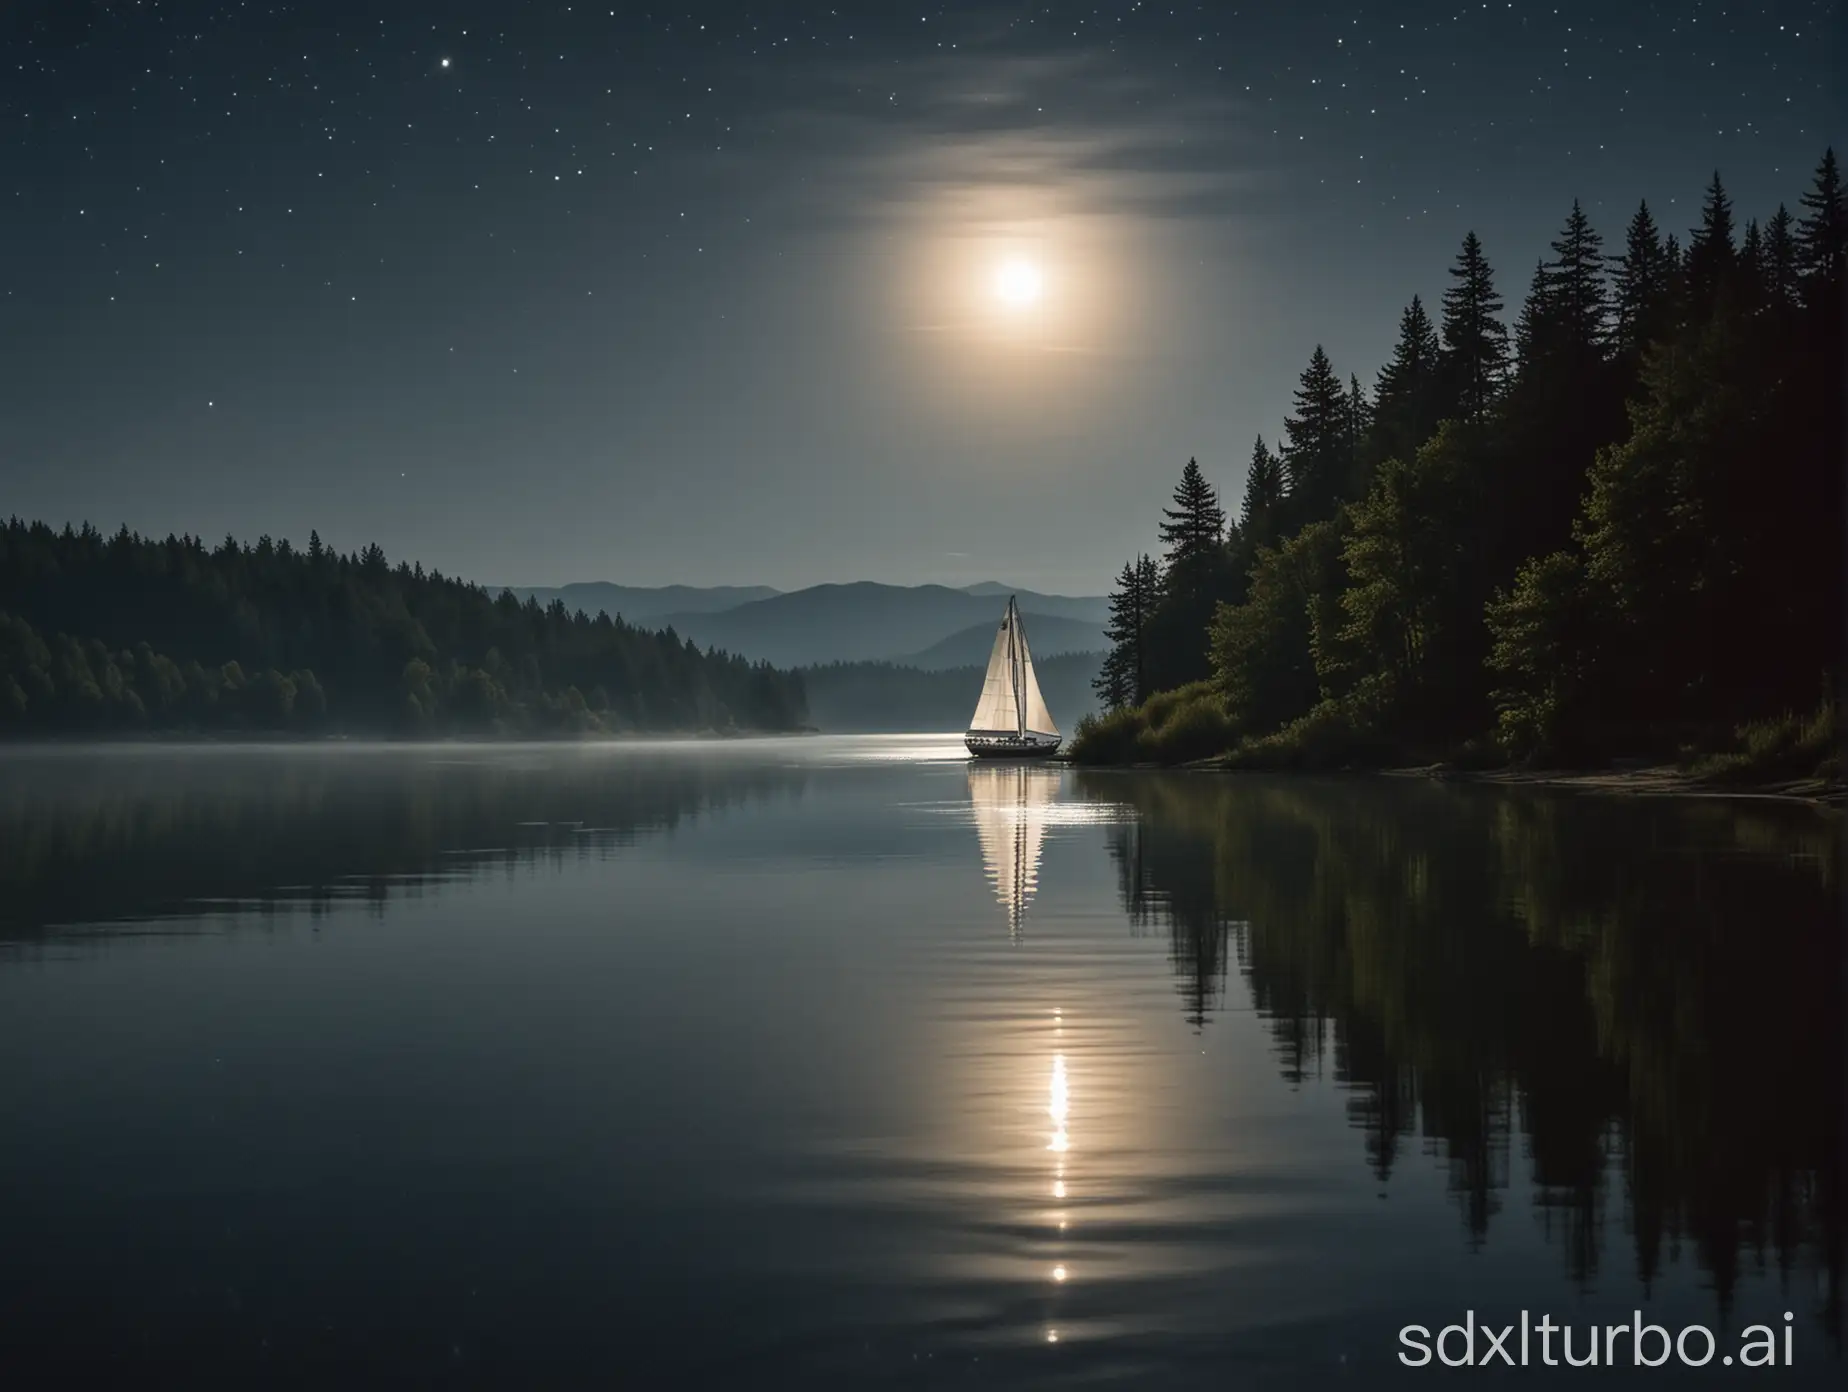 Lake at night in the moonlight, with a sailboat sailing in the moonlight